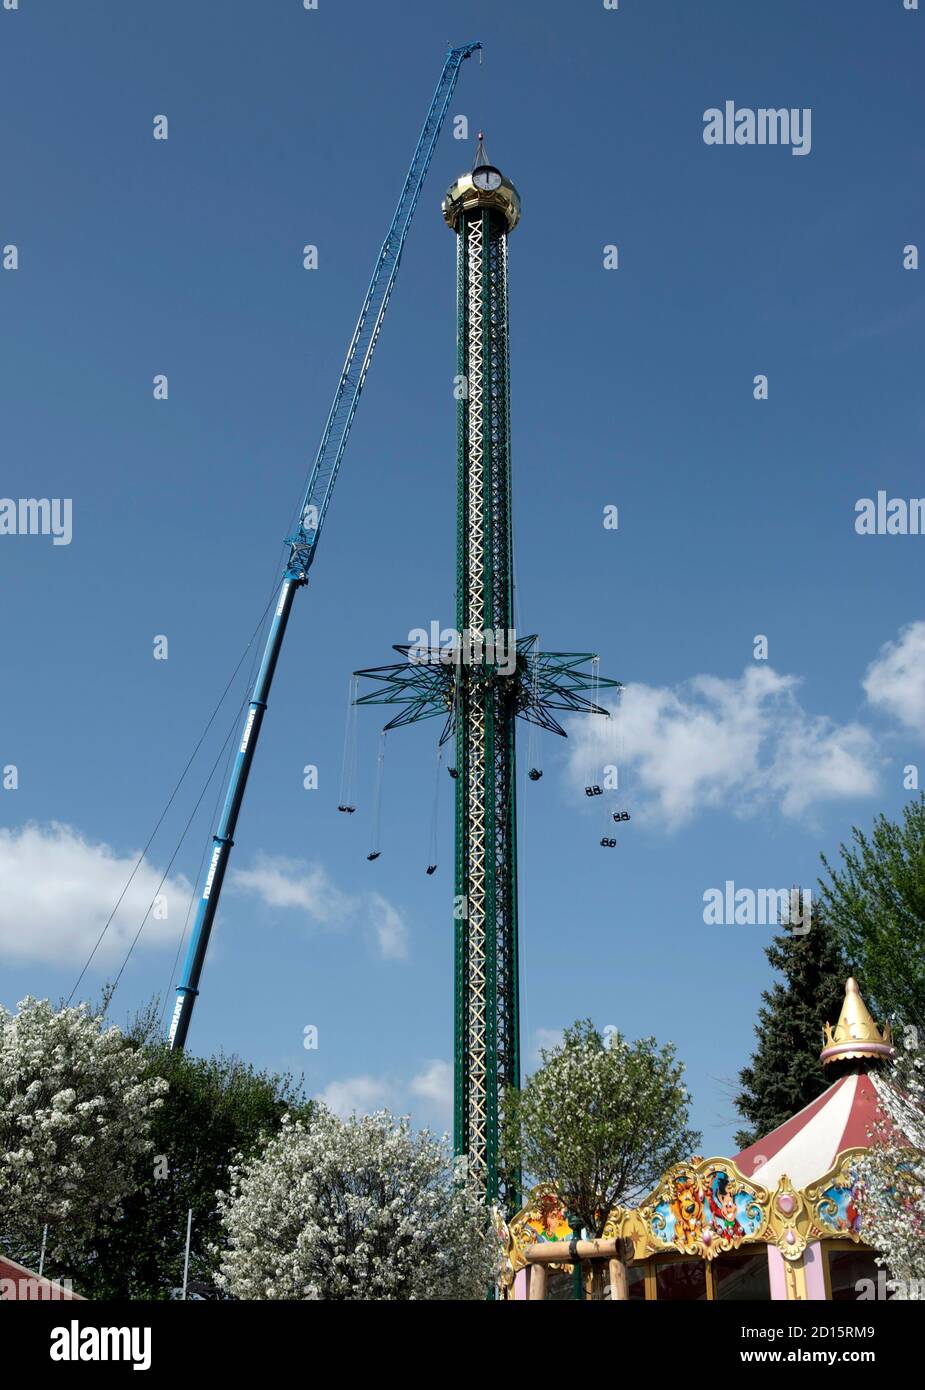 The world's tallest chairoplane is built in the Prater amusement park in  Vienna April 22, 2010. With a height of 117 metres (384 feet) and three  clocks on top of the construction,